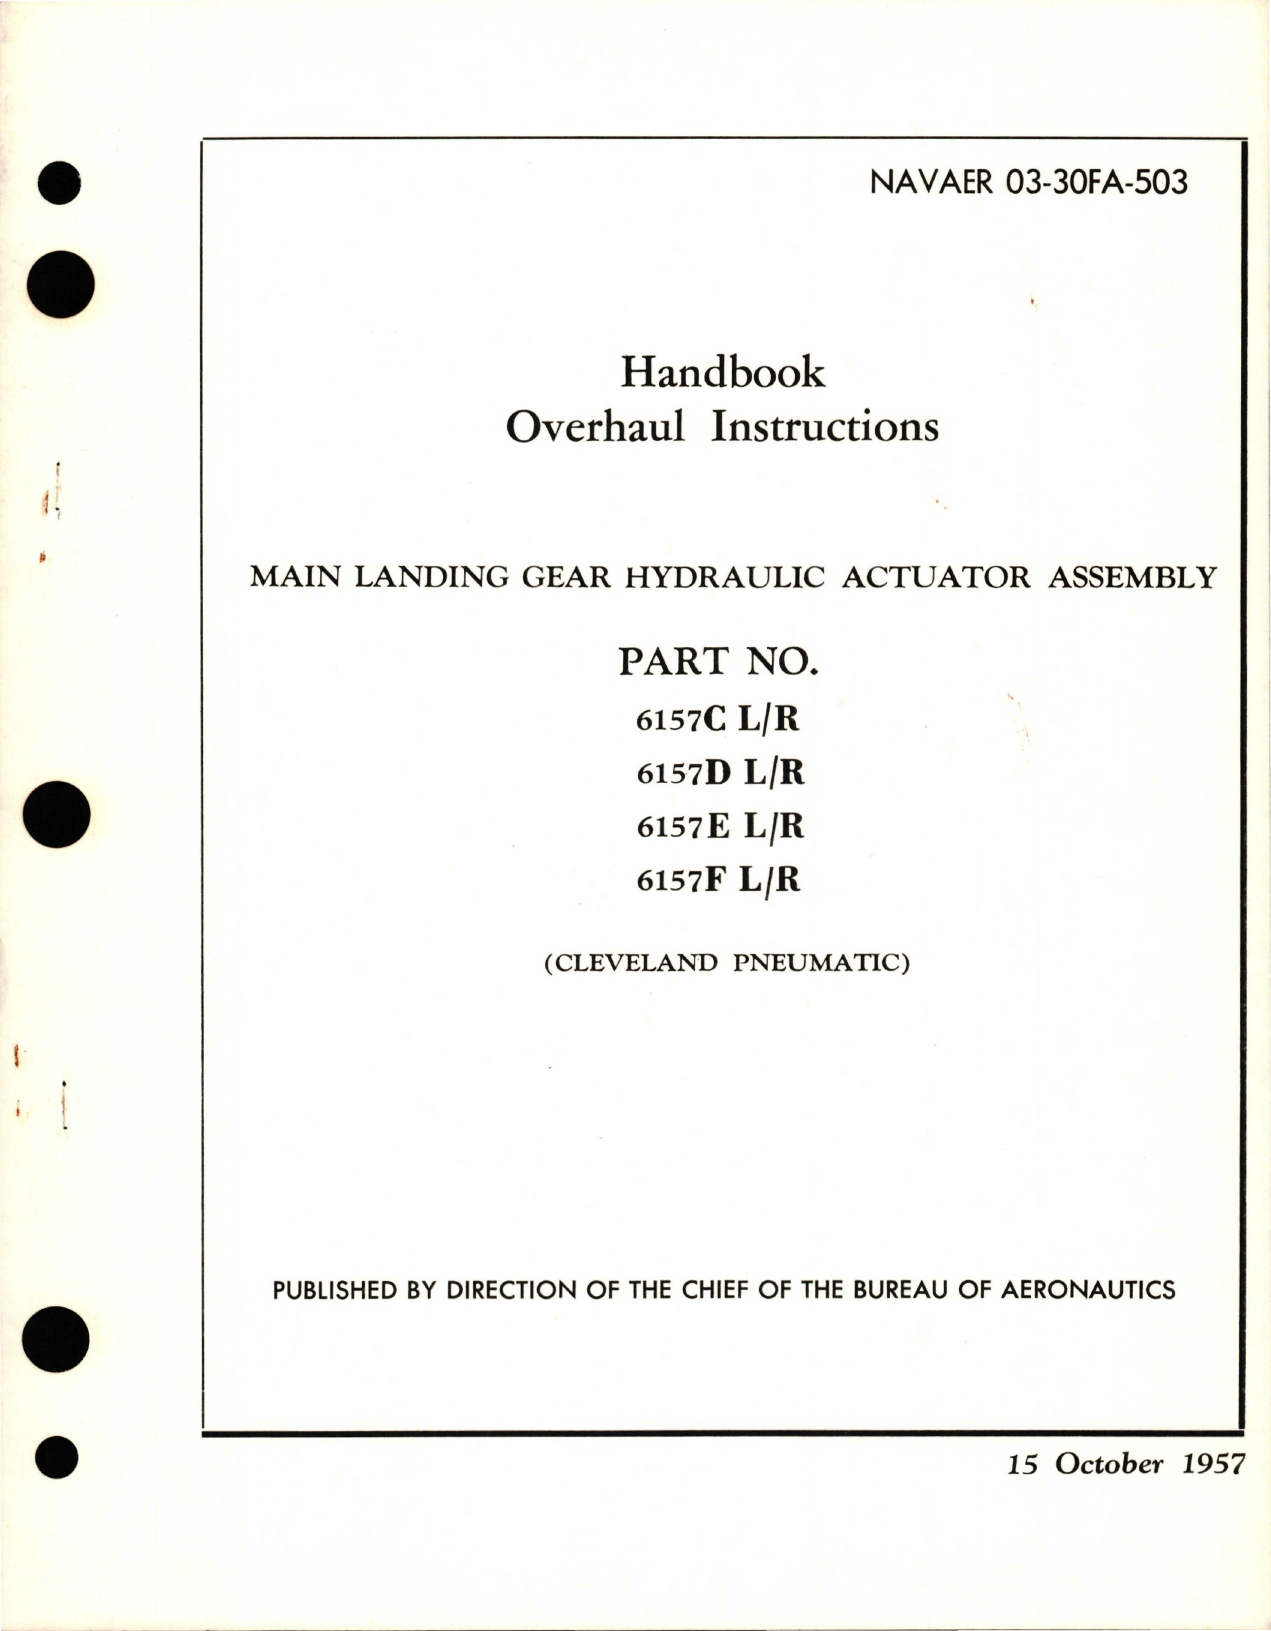 Sample page 1 from AirCorps Library document: Overhaul Instructions for Main Landing Gear Hydraulic Actuator Assembly - Parts 6157C, 6157D, 6157E, and 6157F